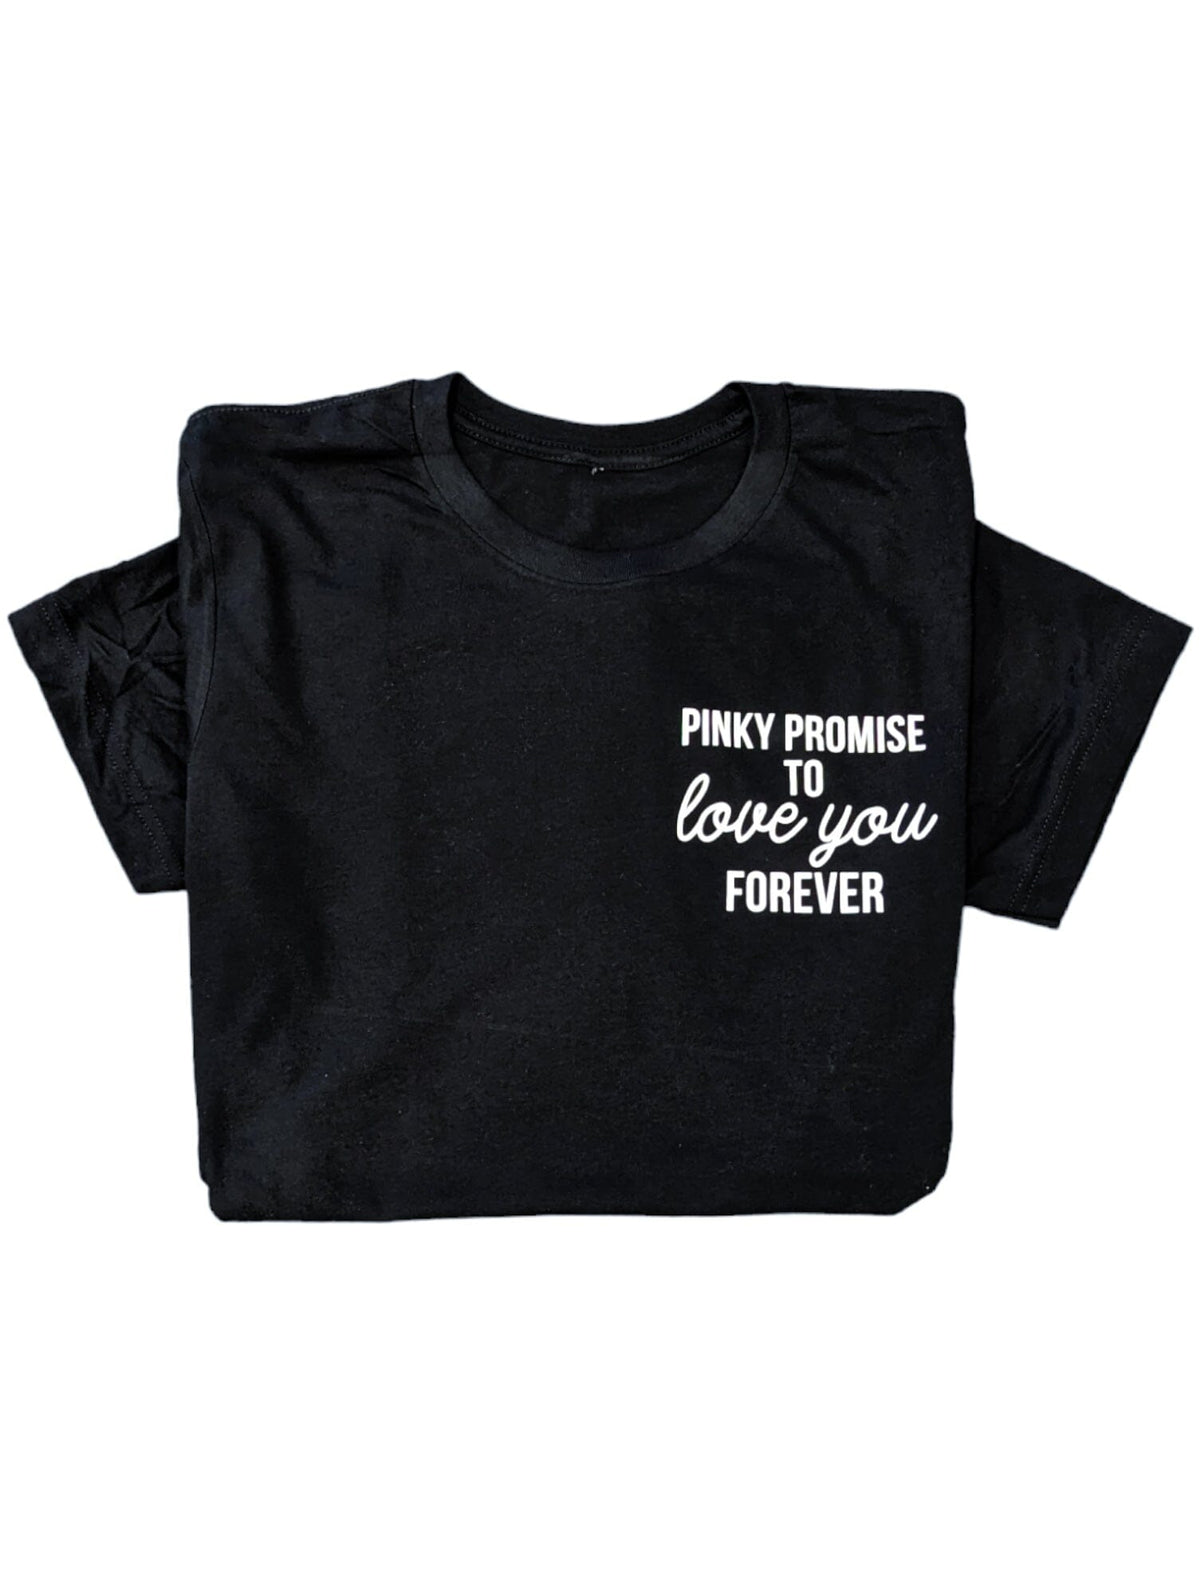 Pinky Promise to Love you Forever Black Tee